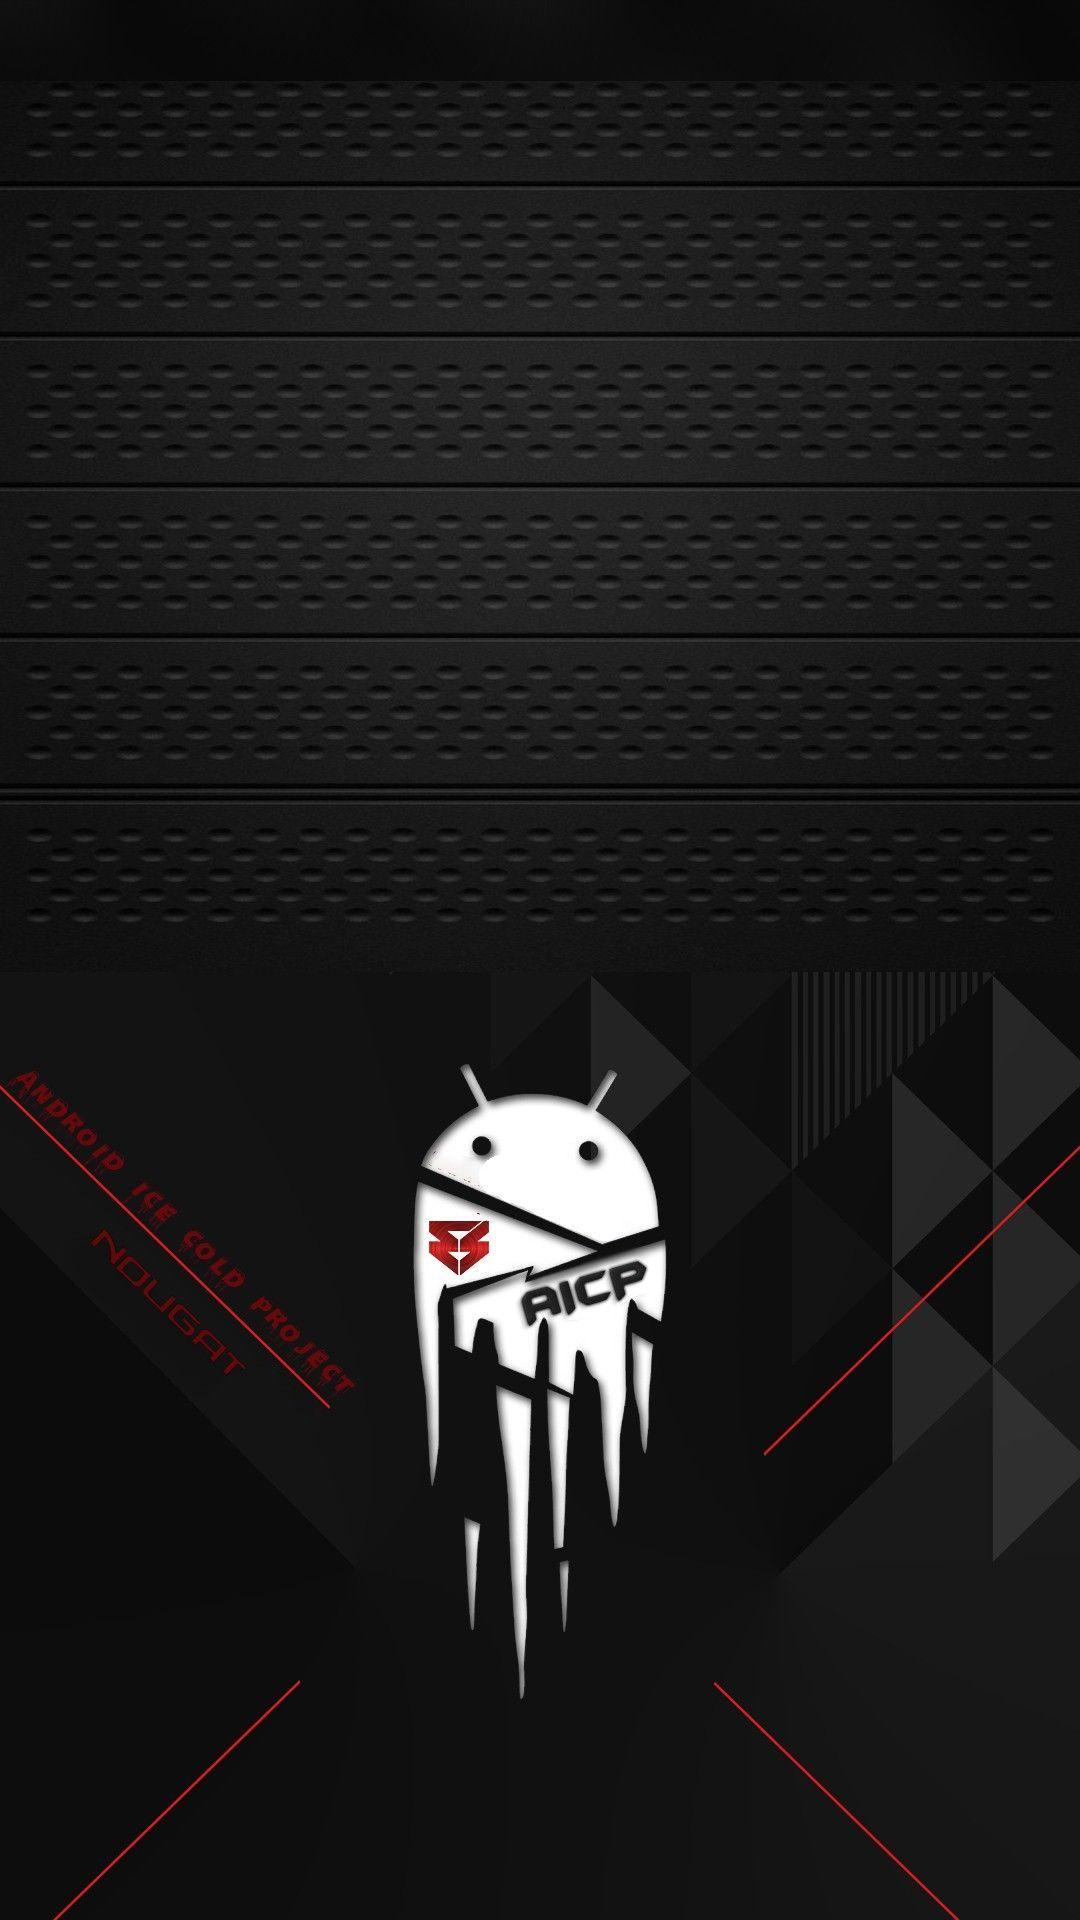 AICP wallpaper for Nexus. Android Ice Cold Wallpaper. Awesome